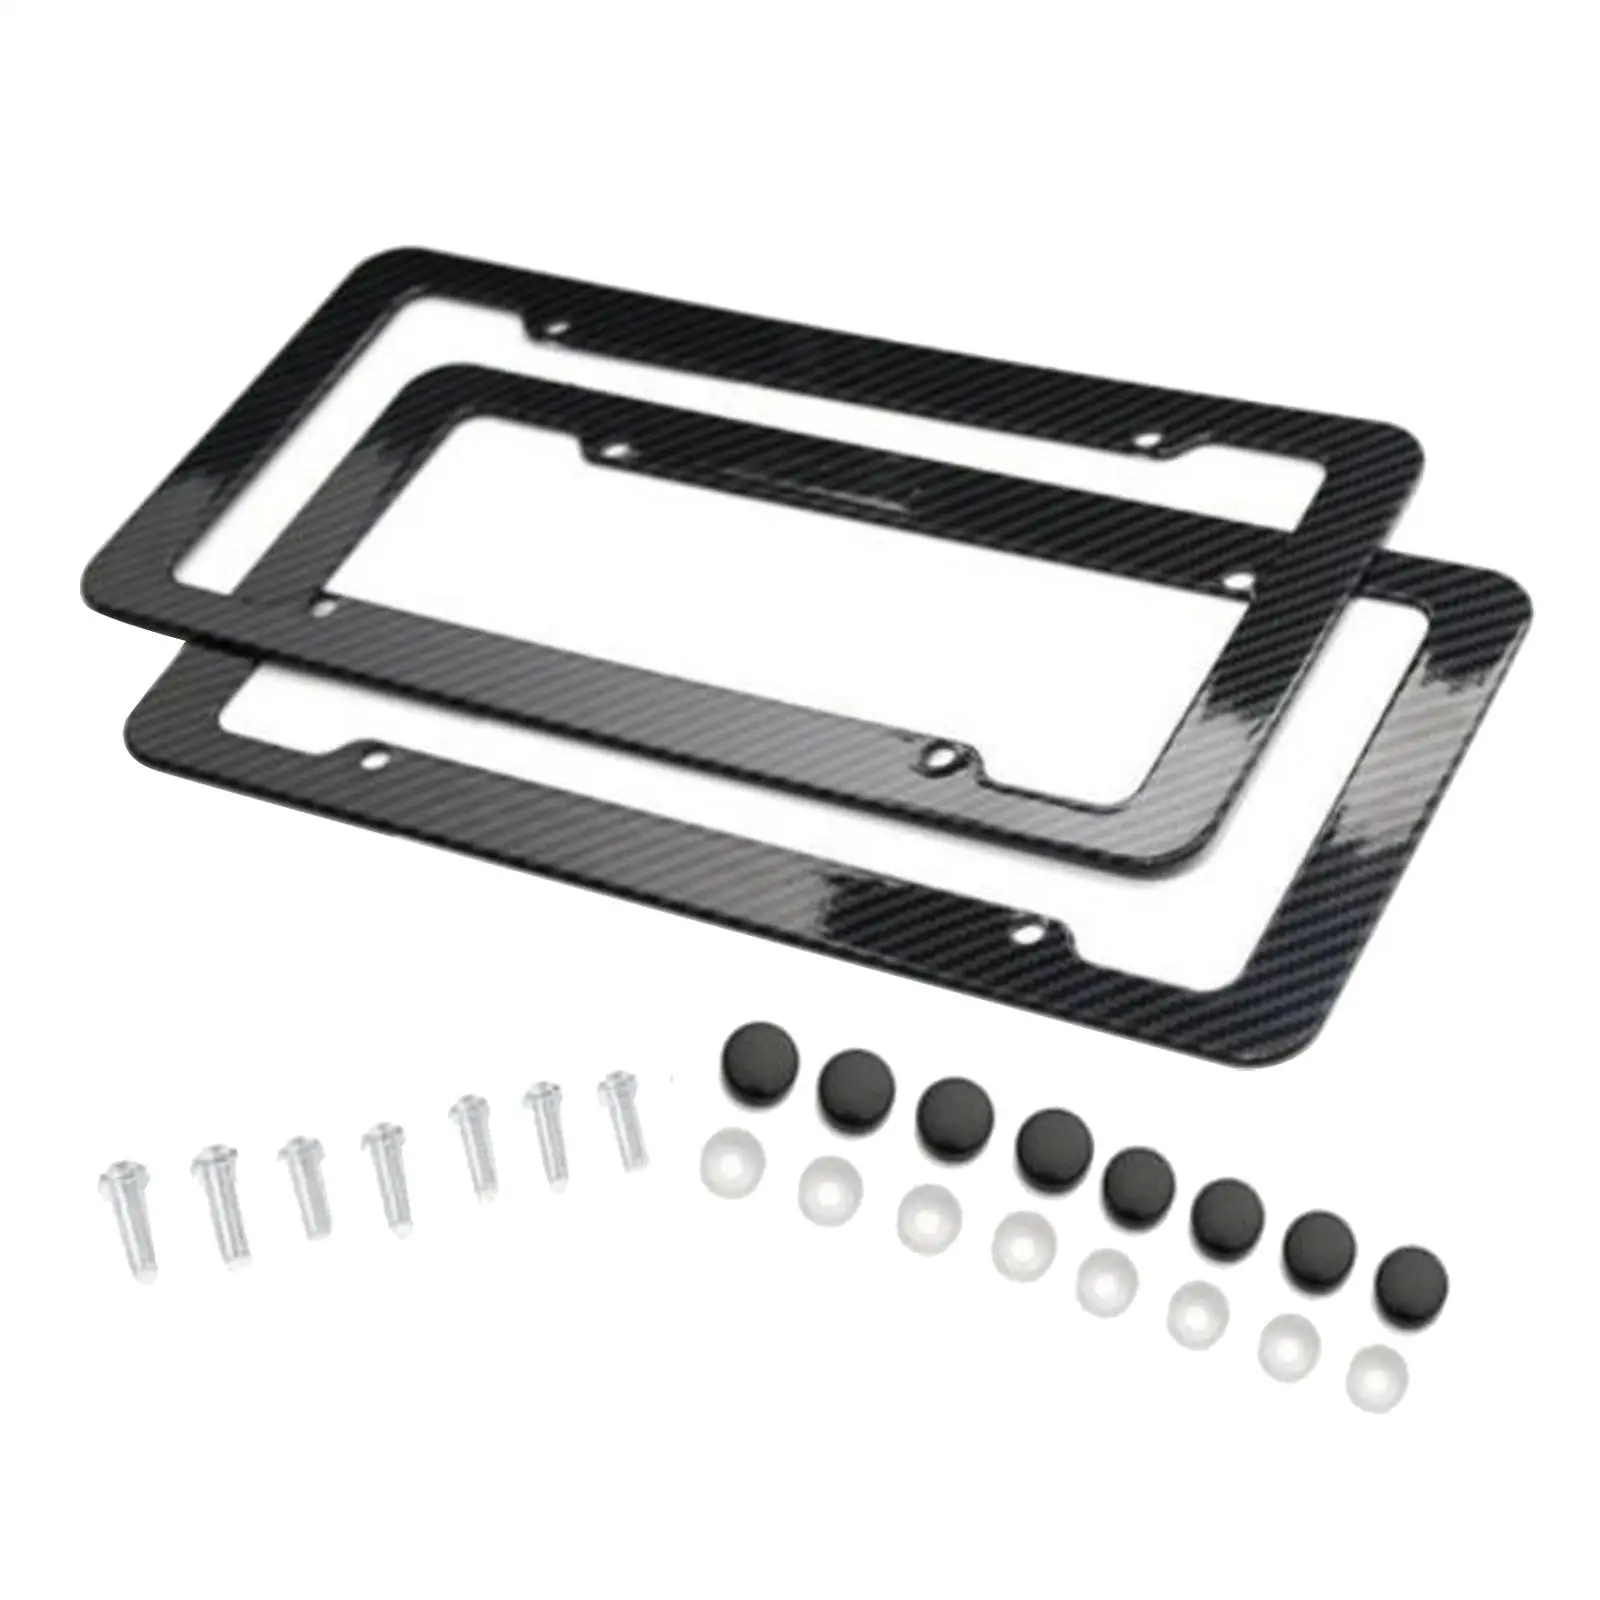 2x Carbon Fiber Style  Frames Plate Covers for US Accessories Durable